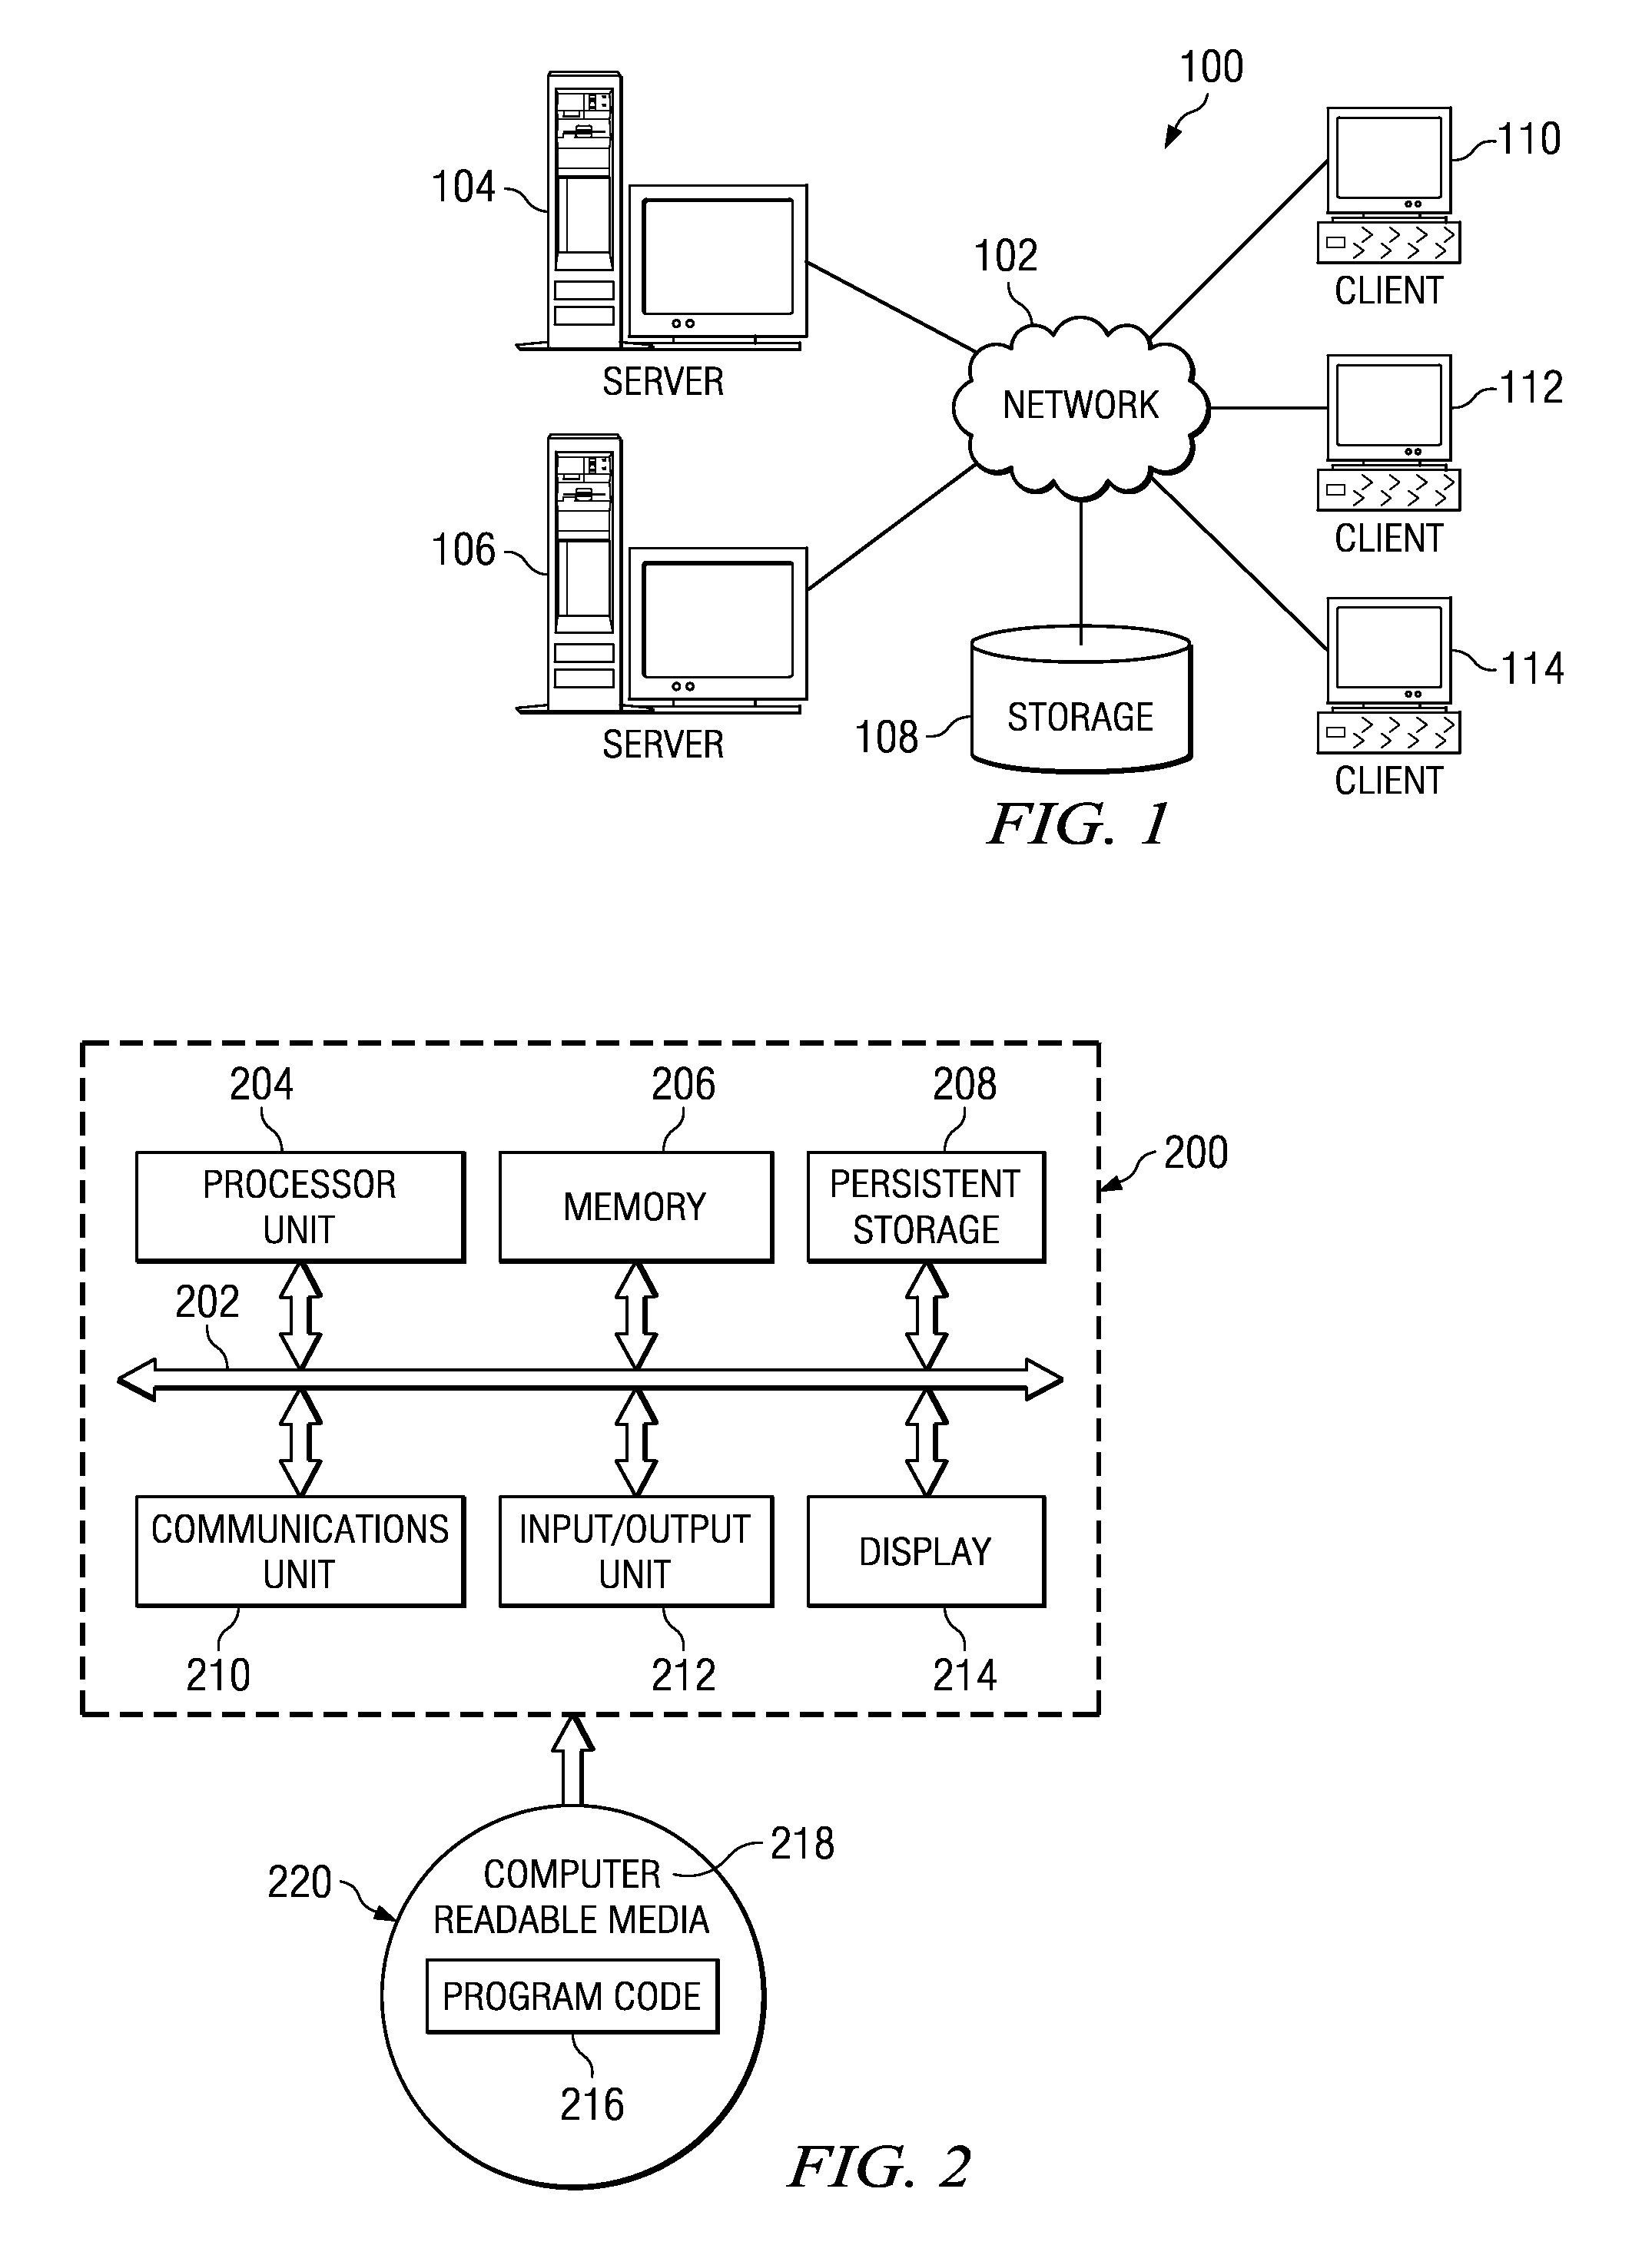 Method and System for User Management of Authentication Tokens